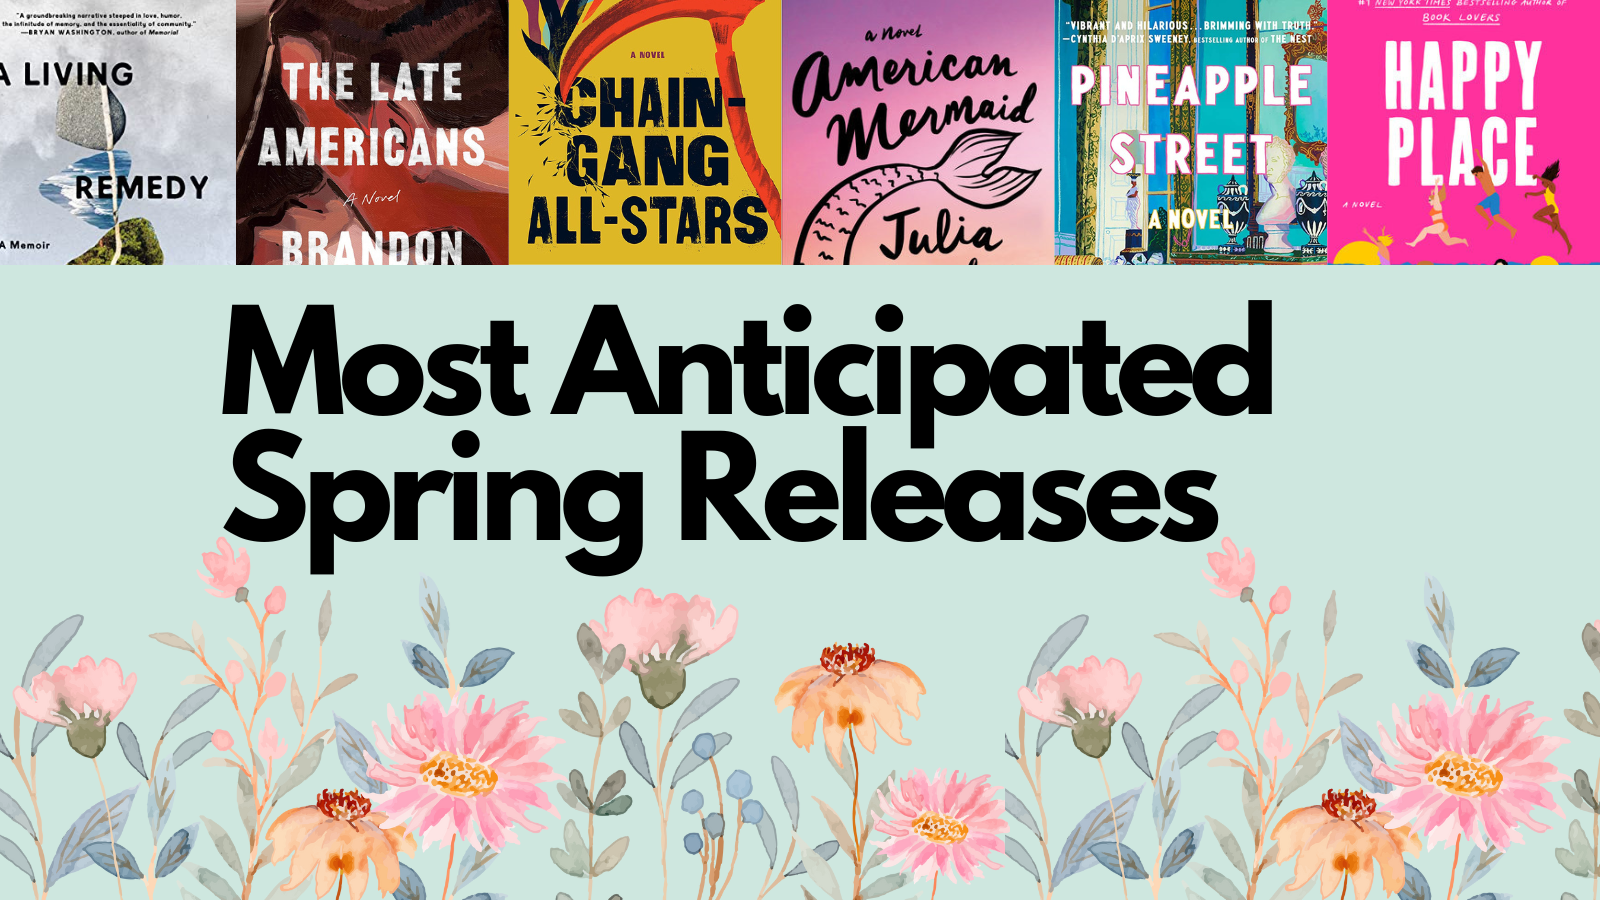 Most Anticipated Spring Releases Des Moines Public Library photo